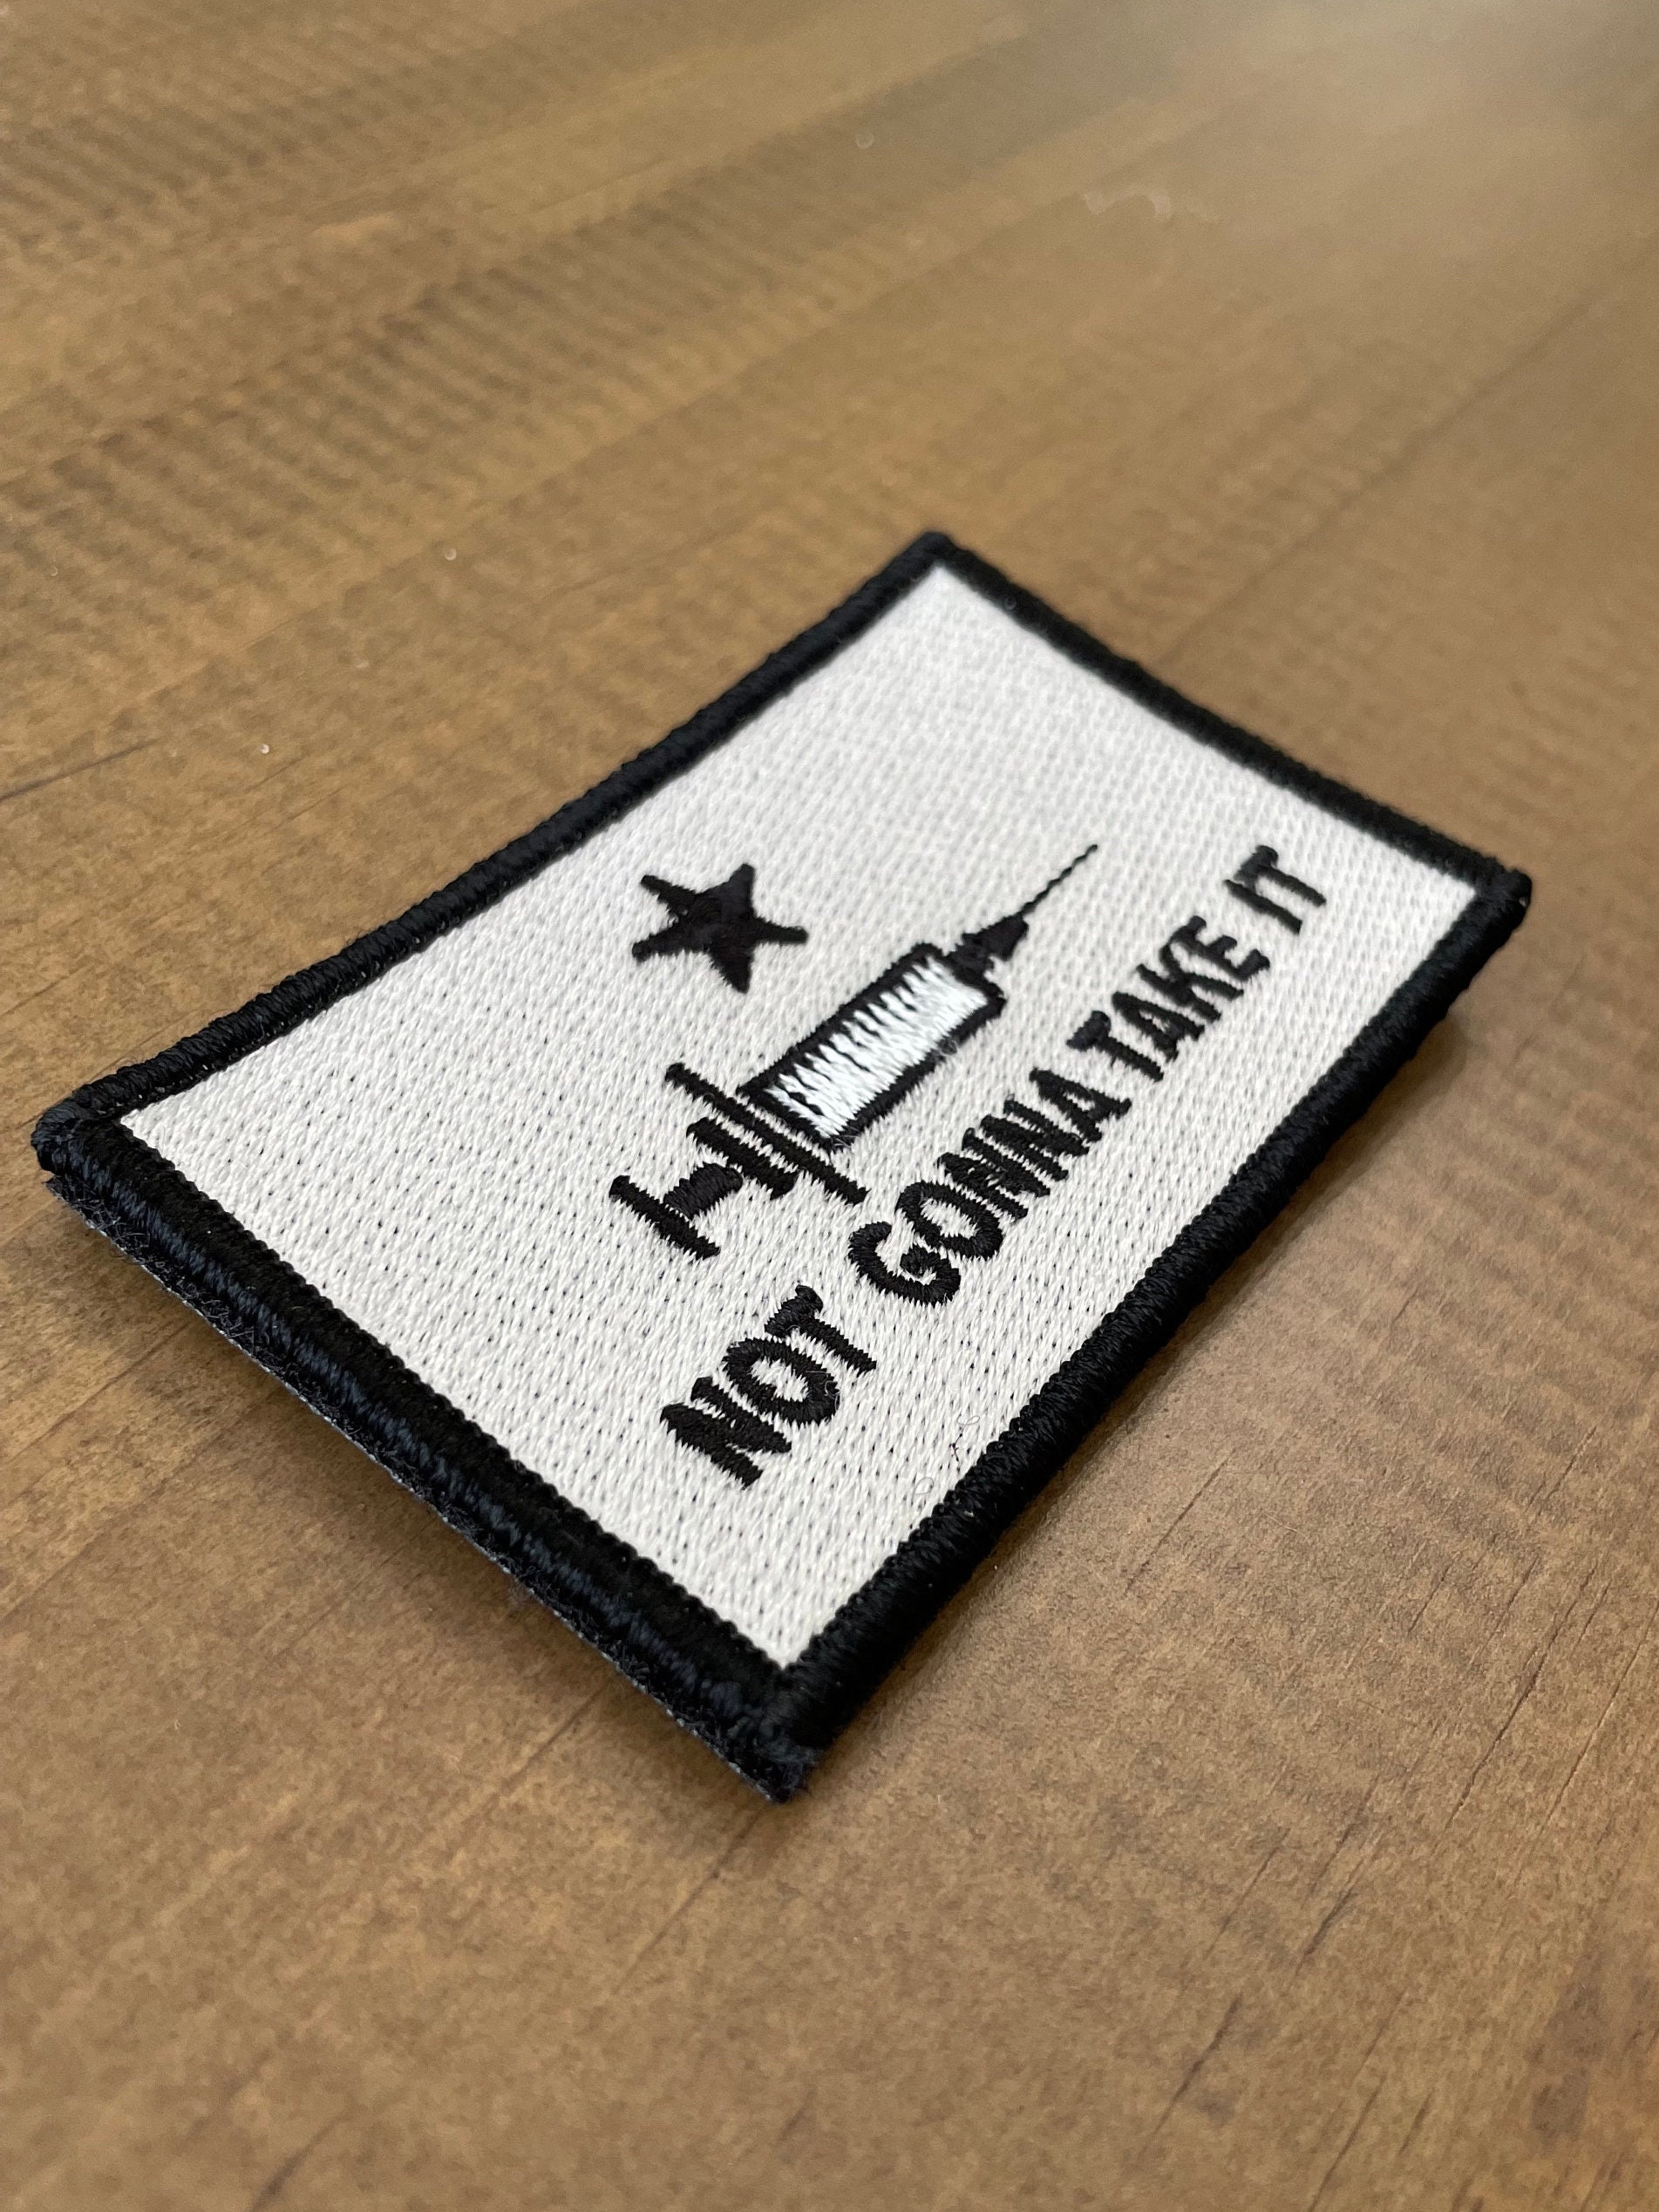  I Love The Smell of Jet Fuel in The Morning Morale Patch.  Perfect for Your Tactical Military Army Gear, Backpack, Operator Baseball  Cap, Plate Carrier or Vest. 2x3 Hook Patch. Made